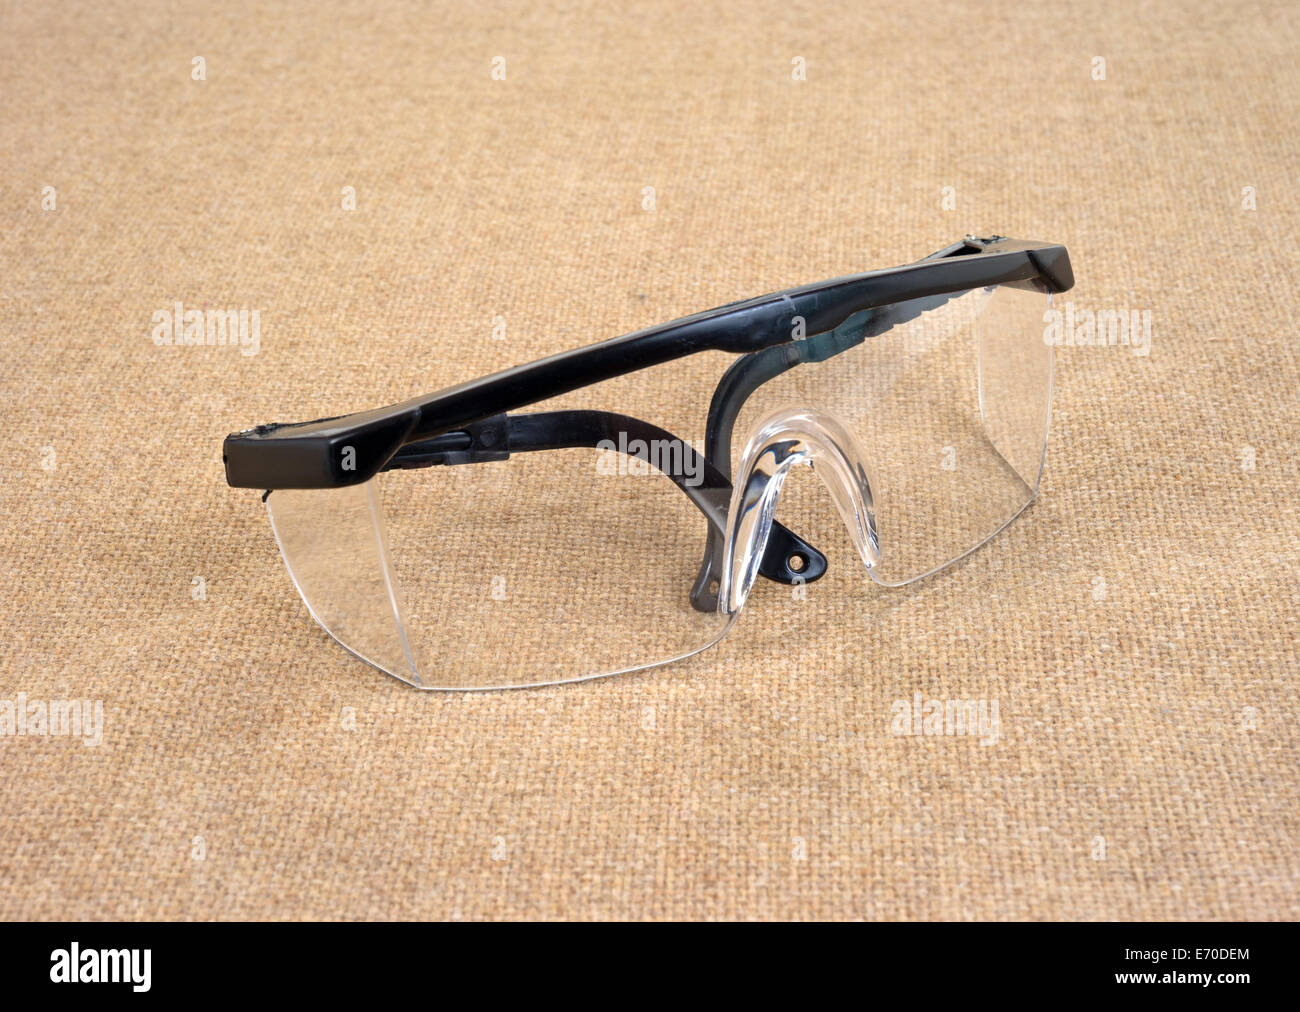 A pair of used safety glasses on a burlap background. Stock Photo